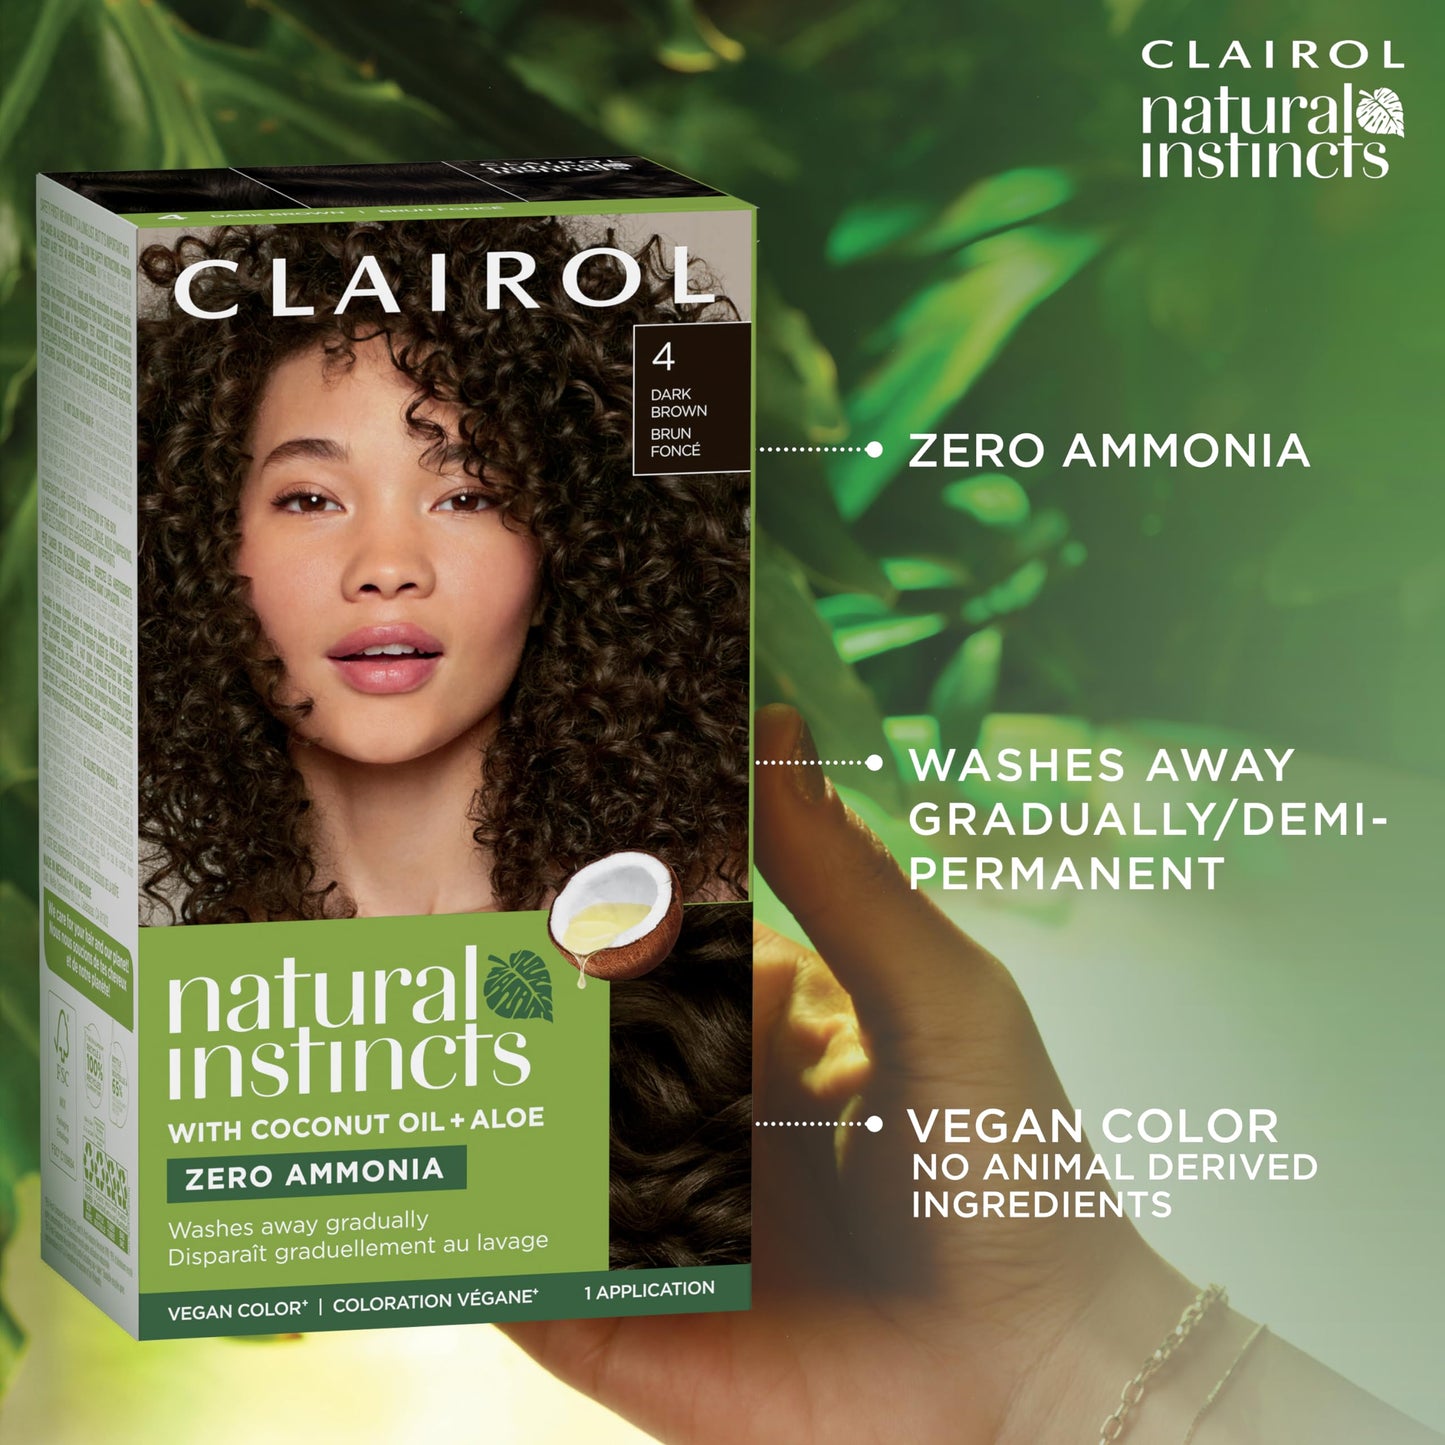 Clairol Natural Instincts Demi-Permanent Hair Dye, 9 Light Blonde Hair Color, Pack of 1, Packaging May Vary